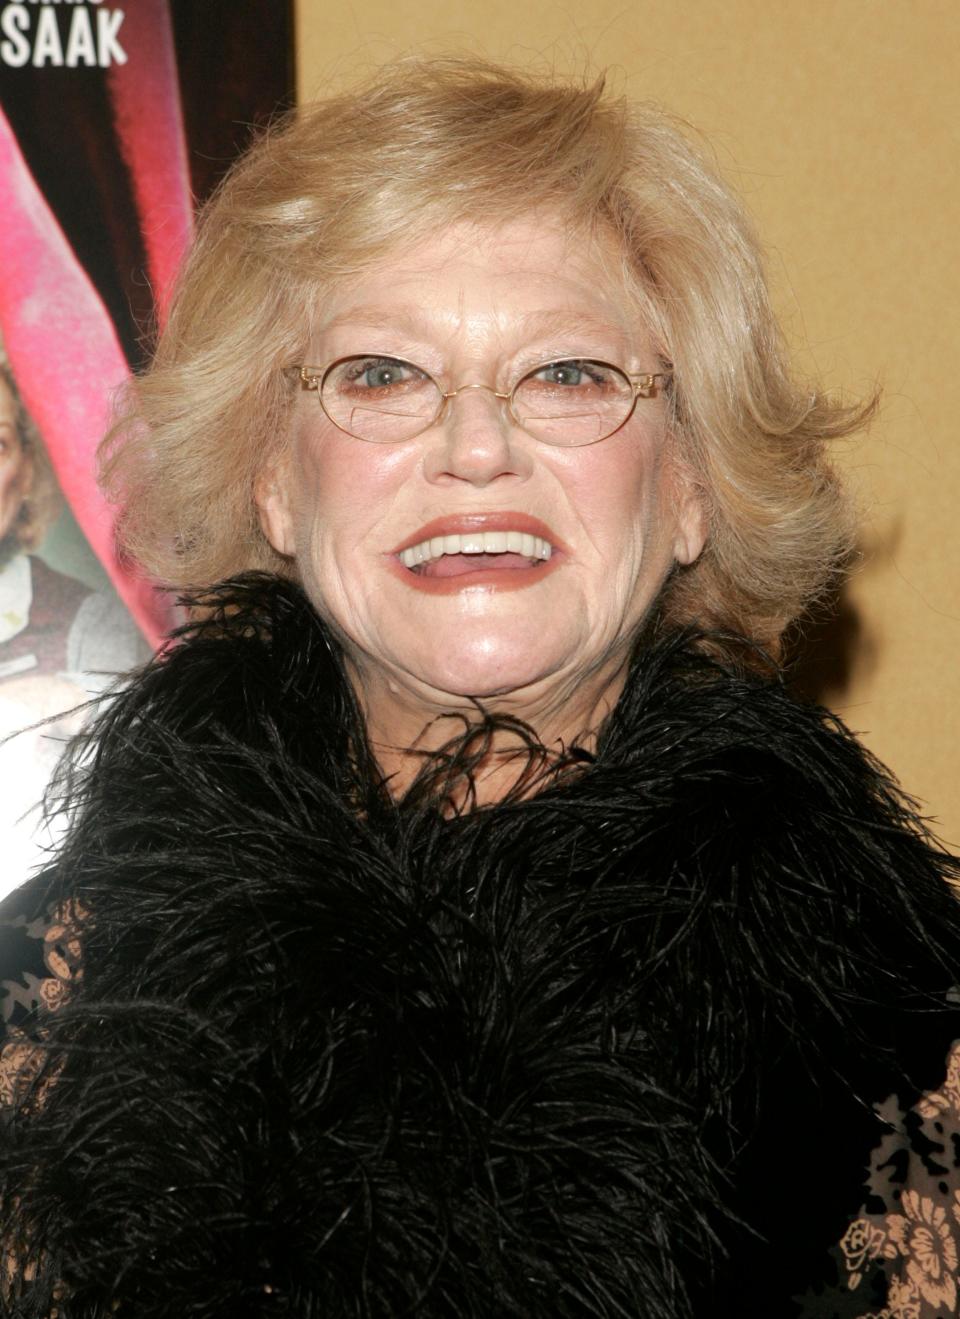 Actress Suzanne Shepherd, seen at the premiere of "A Dirty Shame" in 2004, has died at 89.